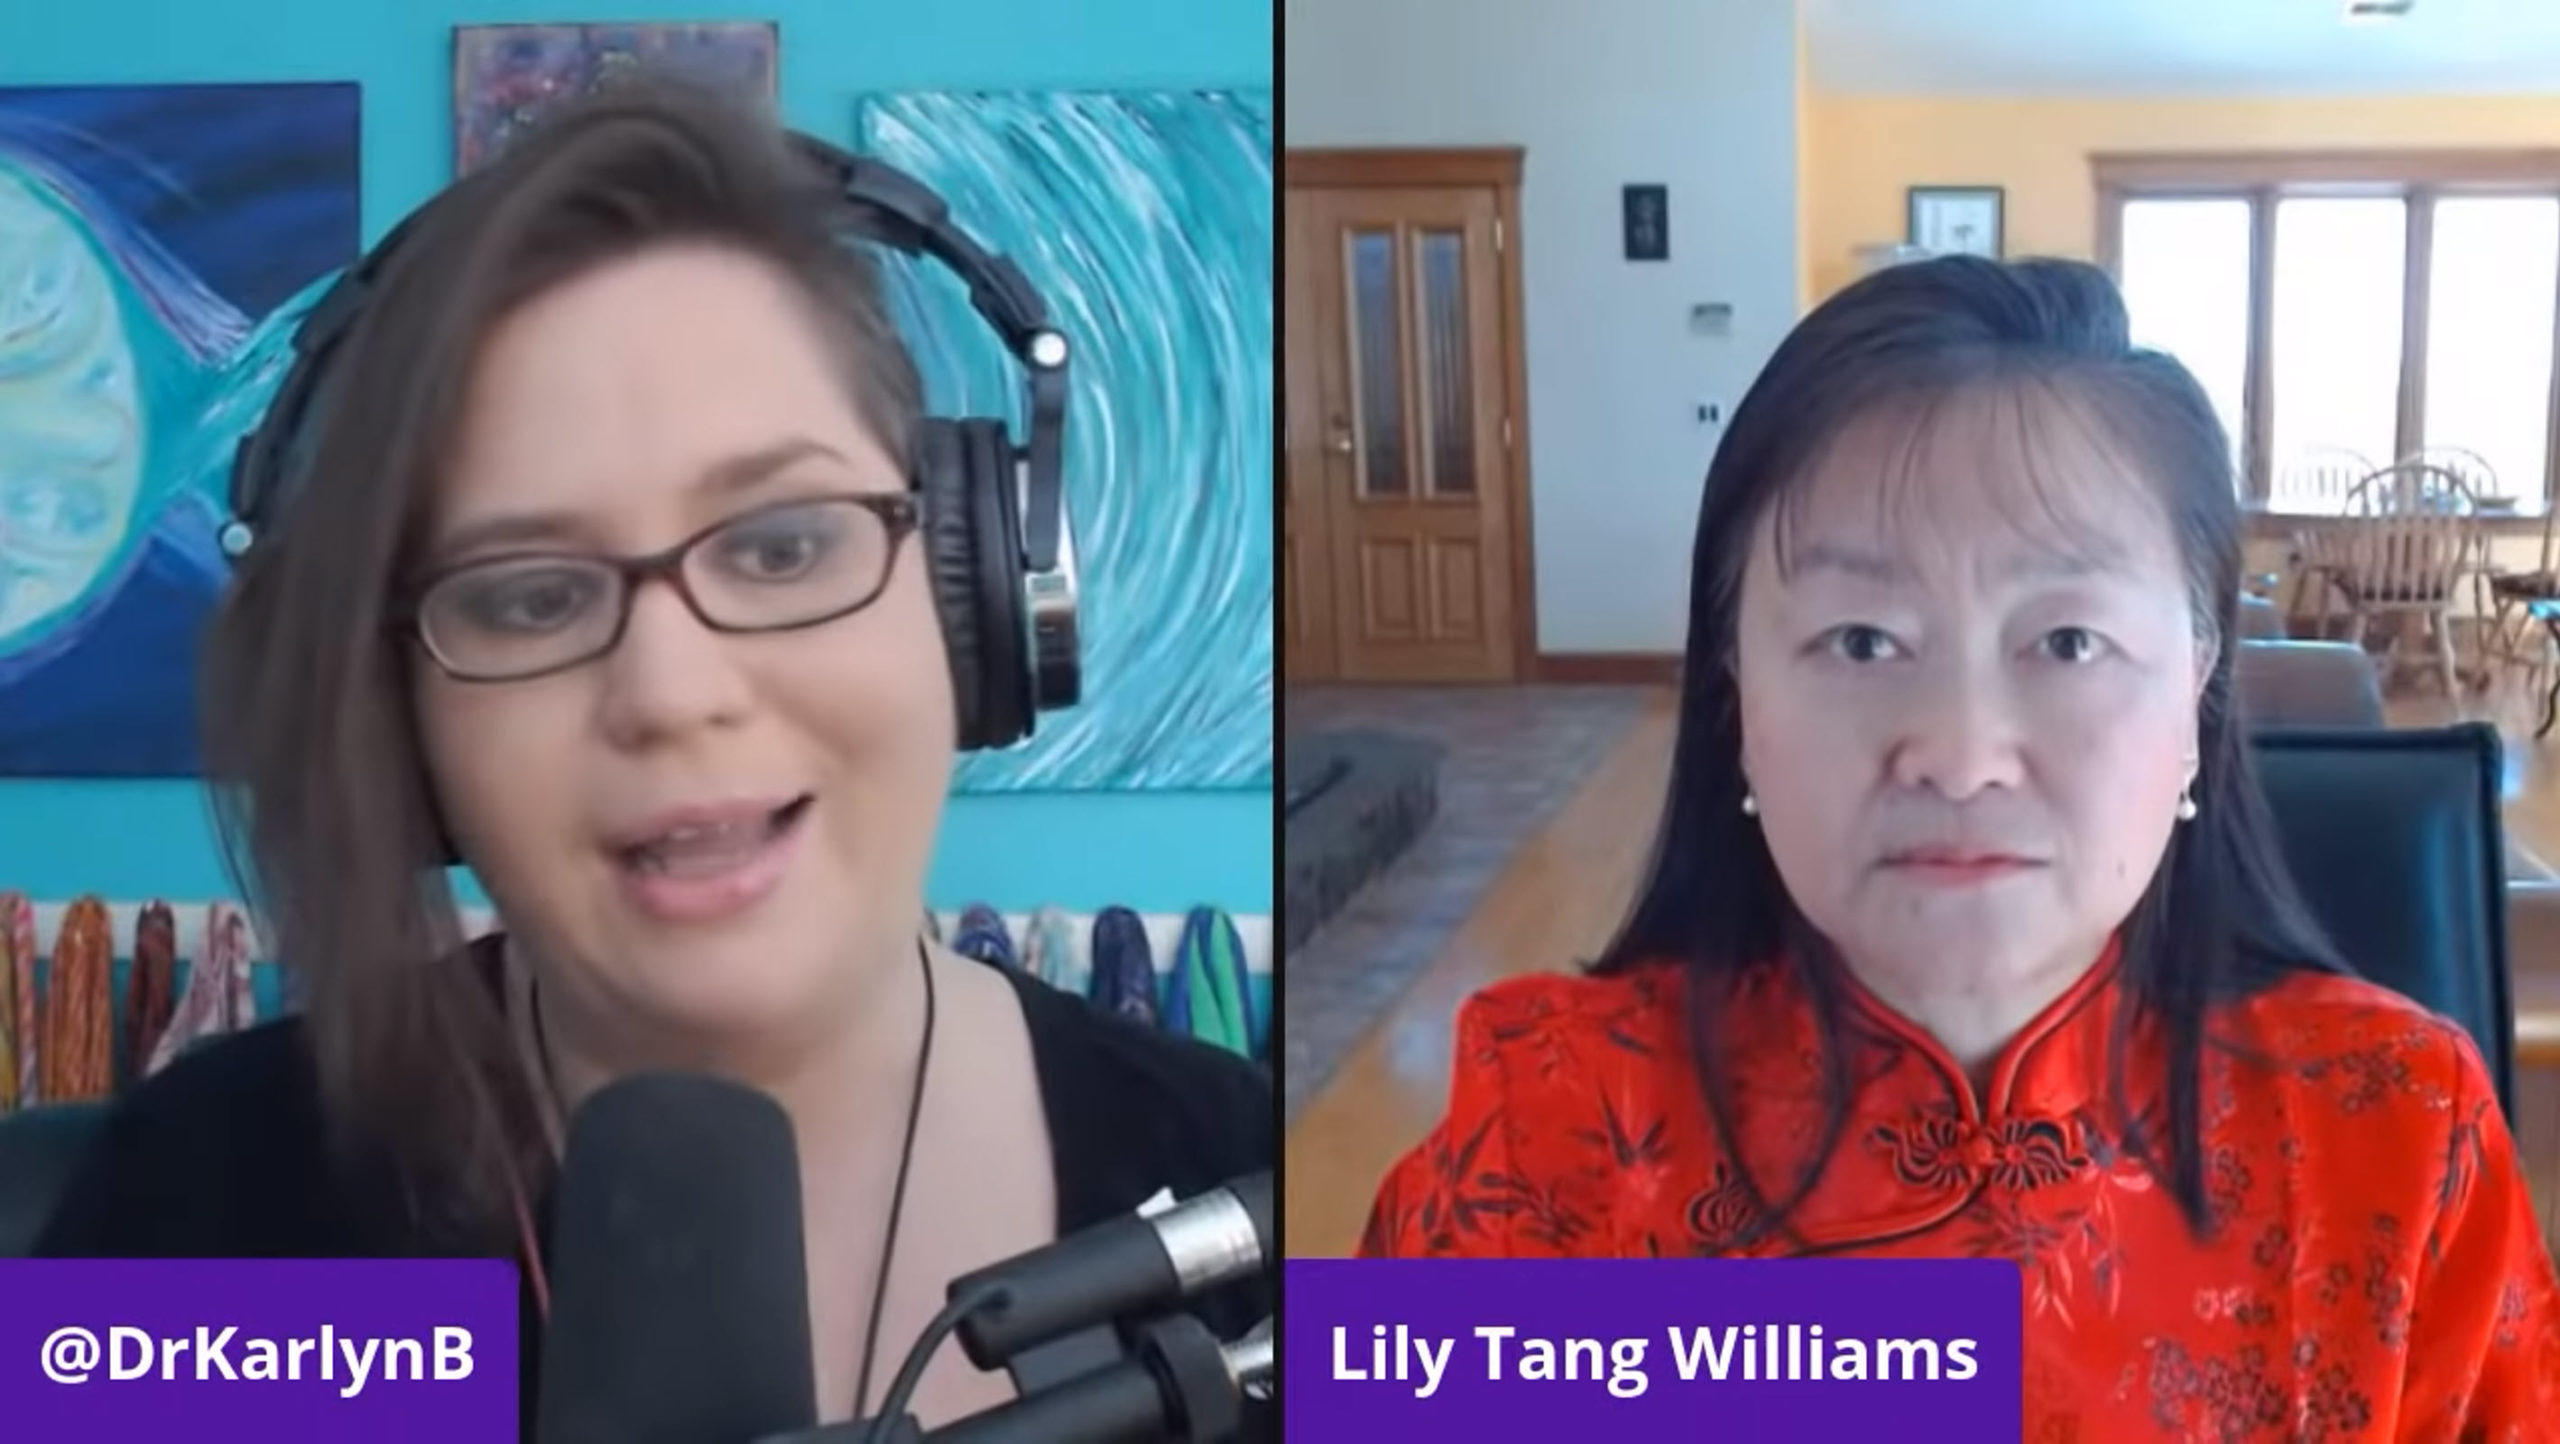 Lily Tang Williams interviewed by Karlyn Borysenko